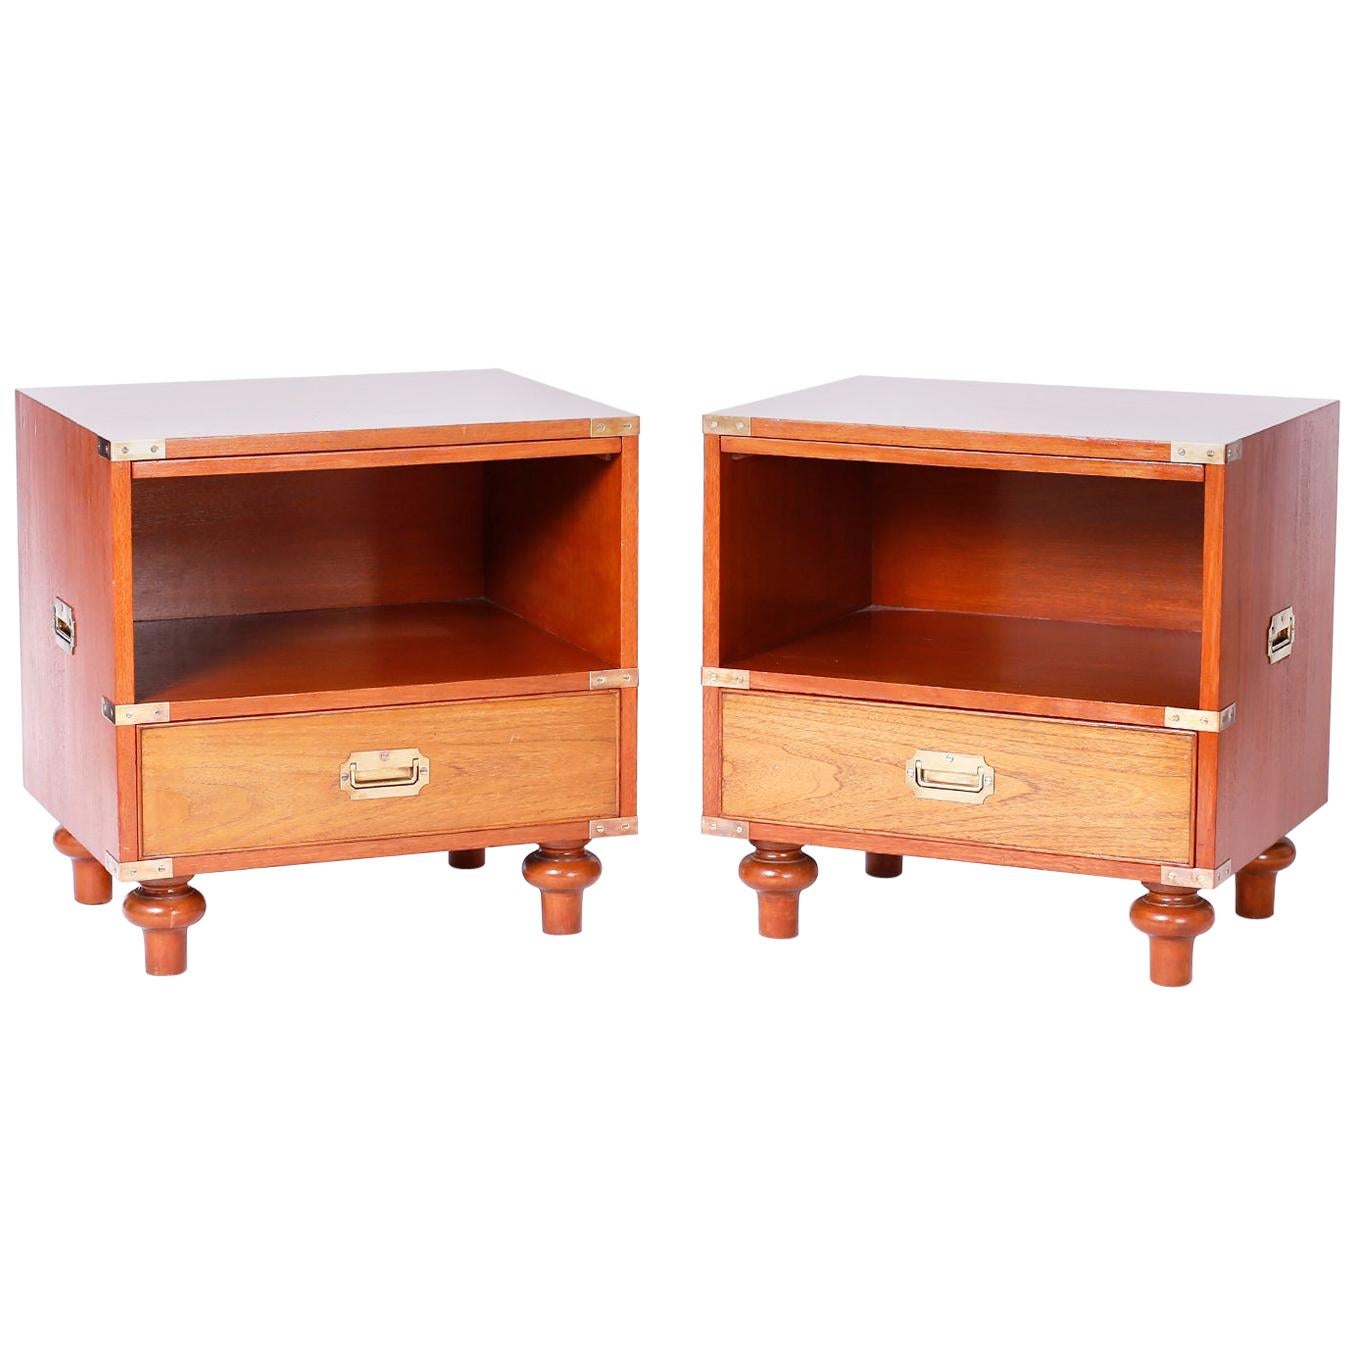 Midcentury Pair of Campaign Style Nightstands by Beacon Hill